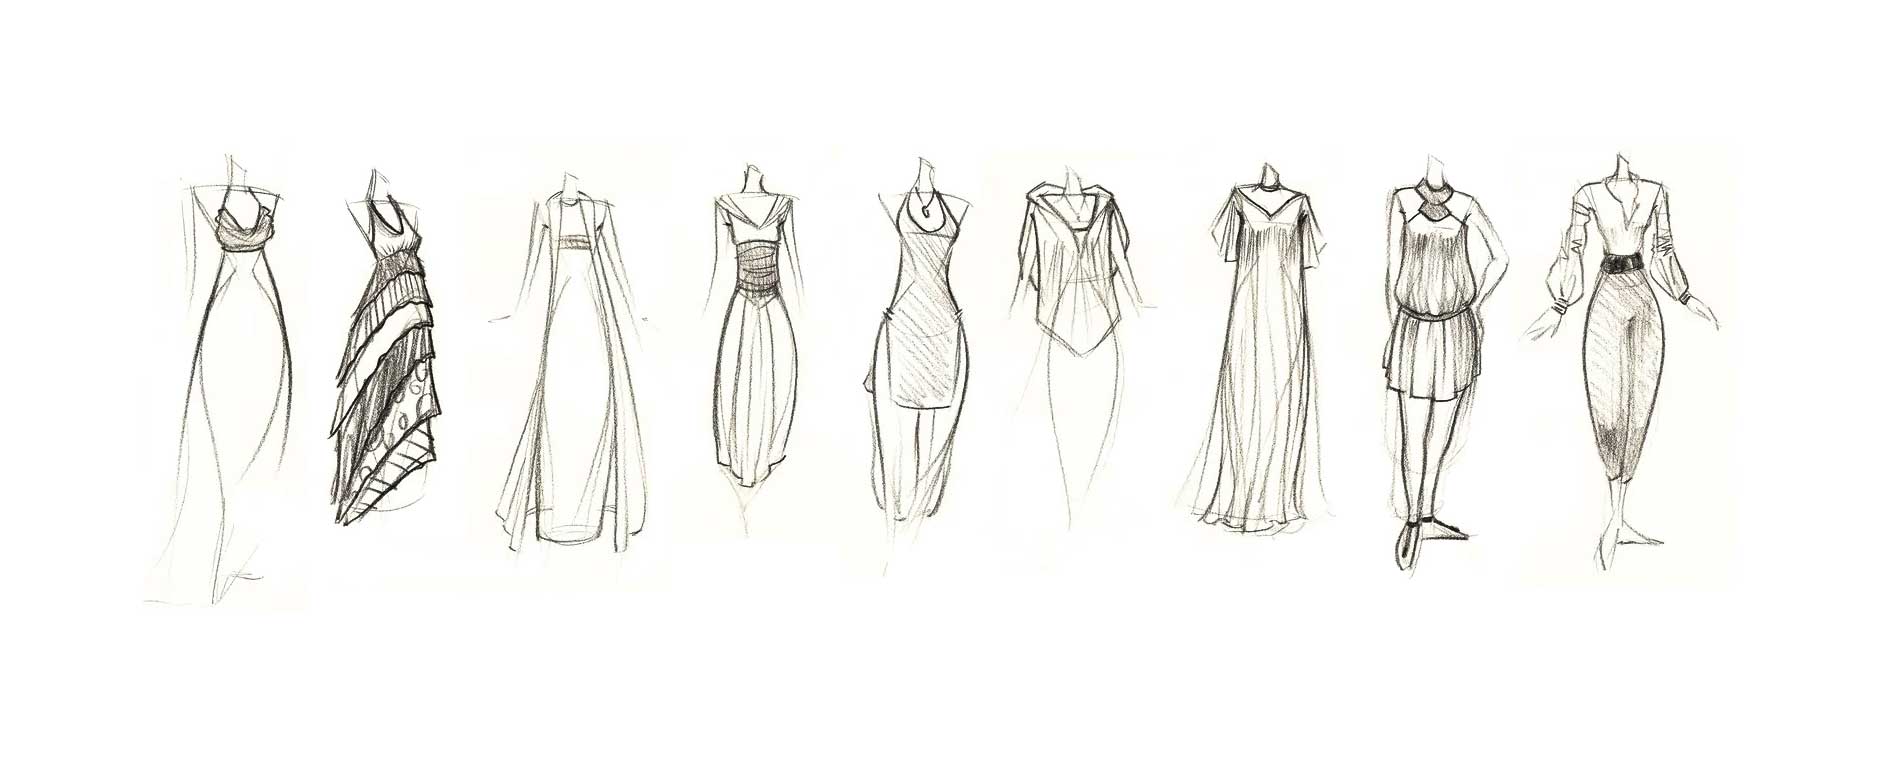 Clothing Design Sketches at PaintingValley.com | Explore ...